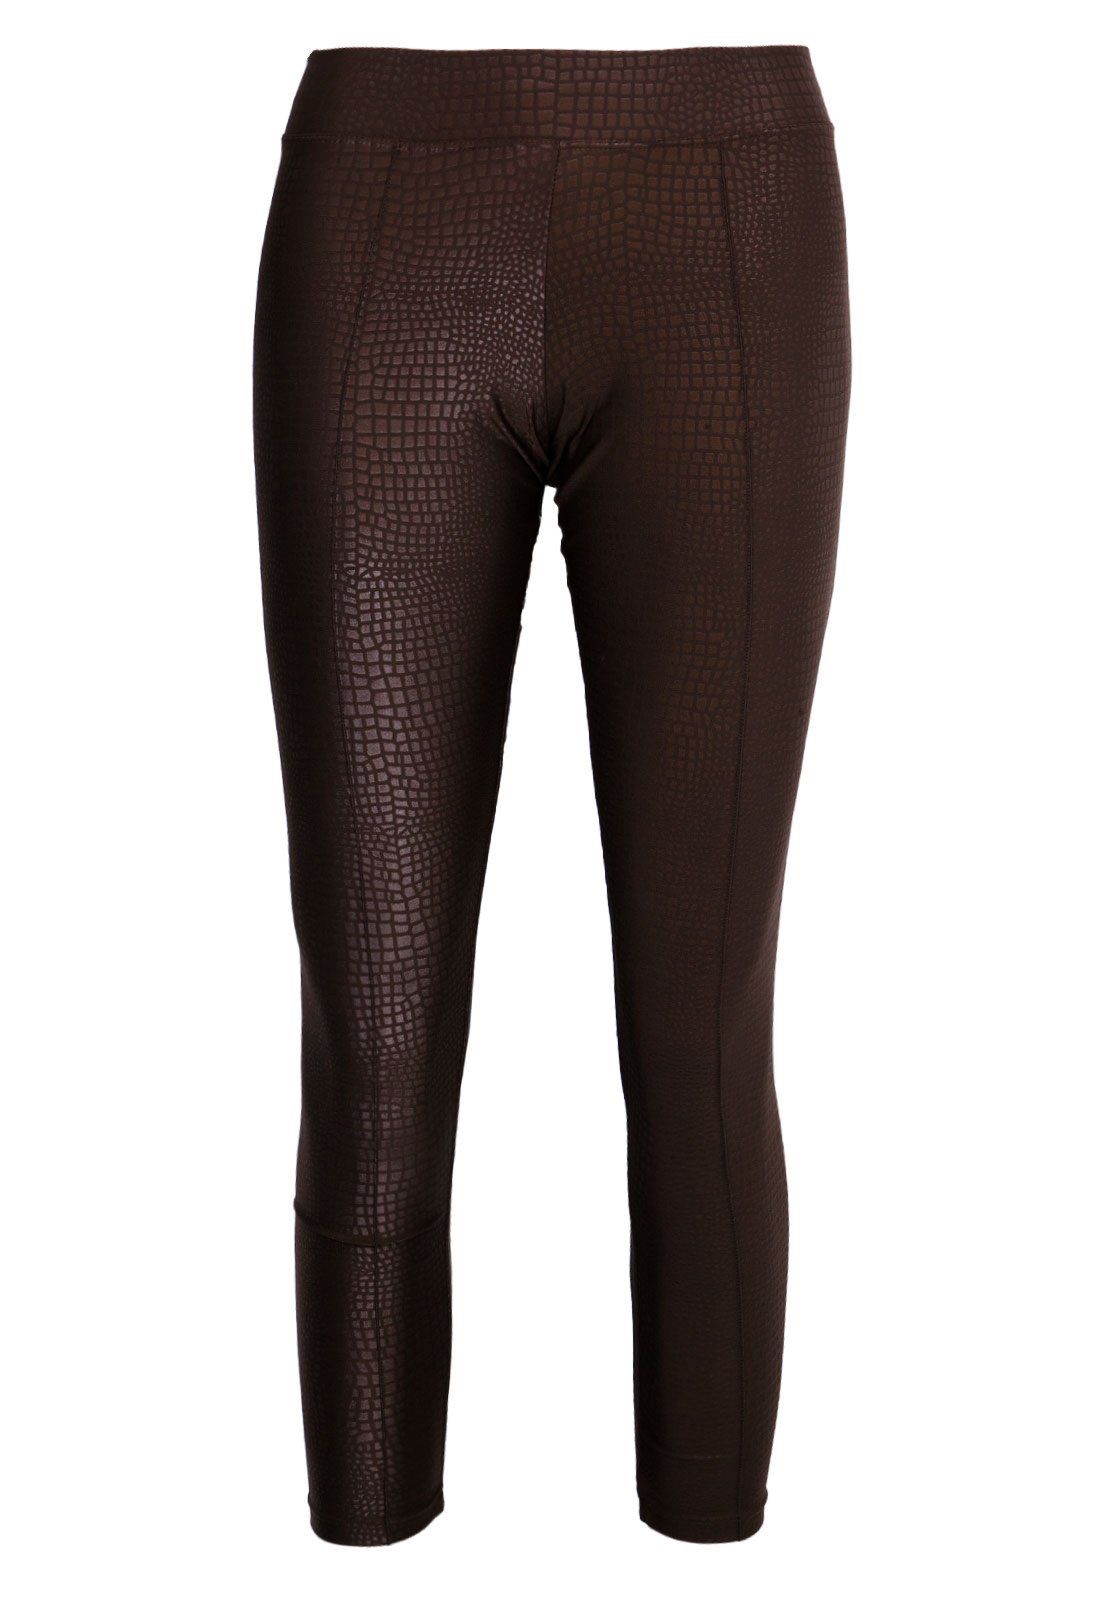 Commando Faux Leather Legging with Control Brown Croc